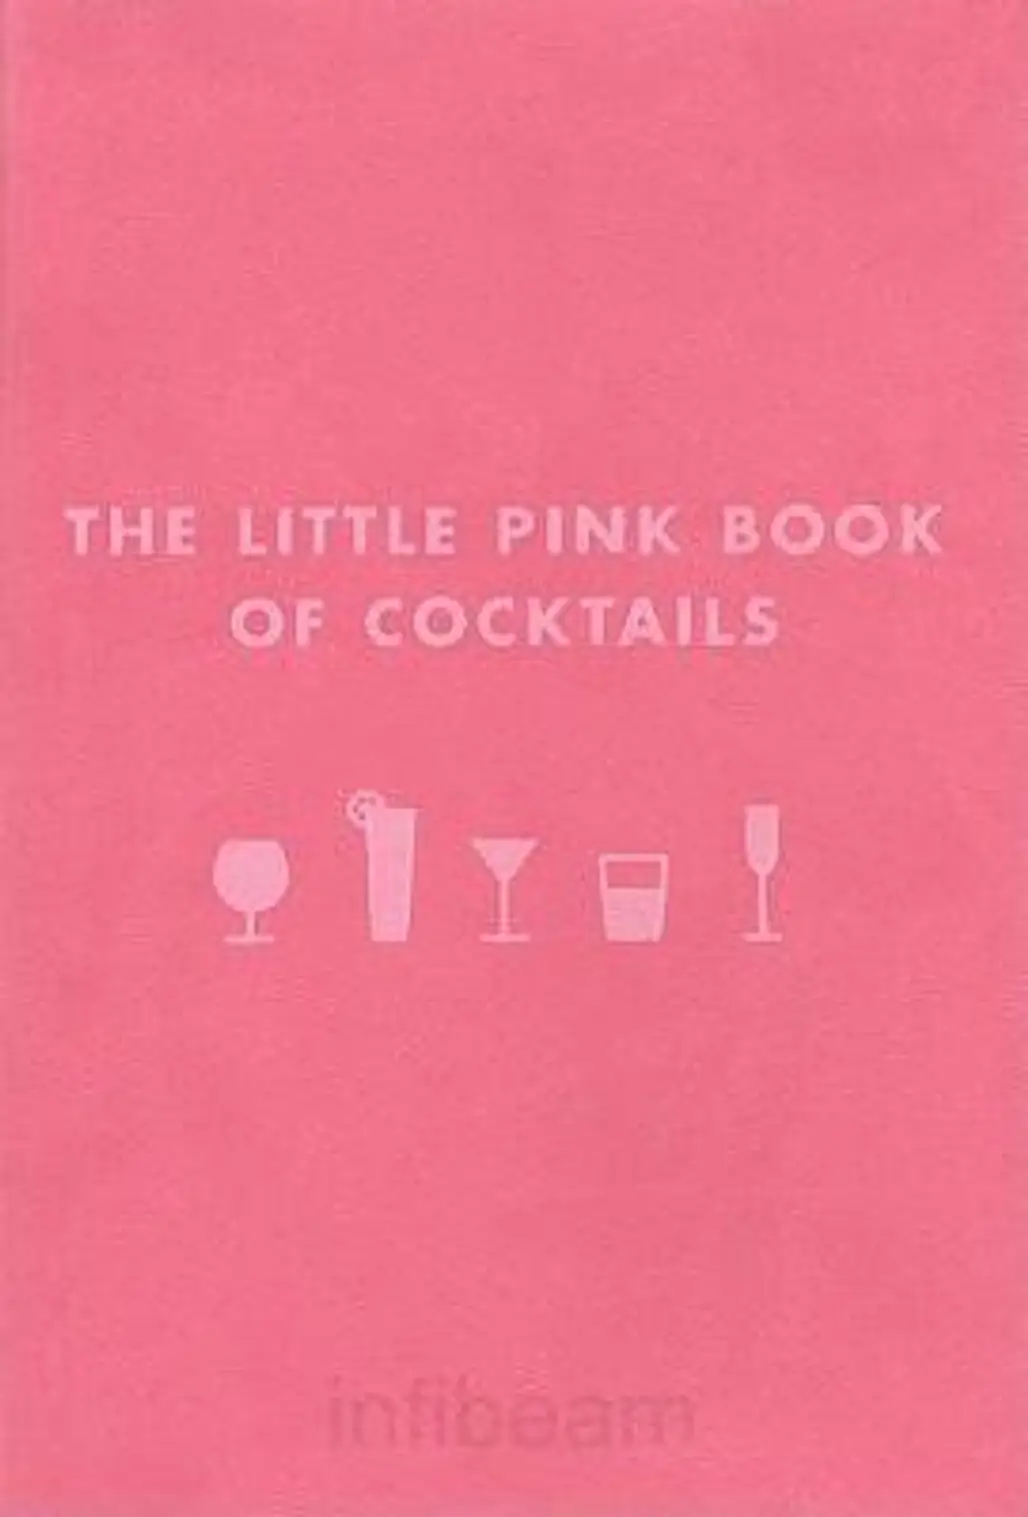 The Little Pink Book of Cocktails by Madeline Teachett